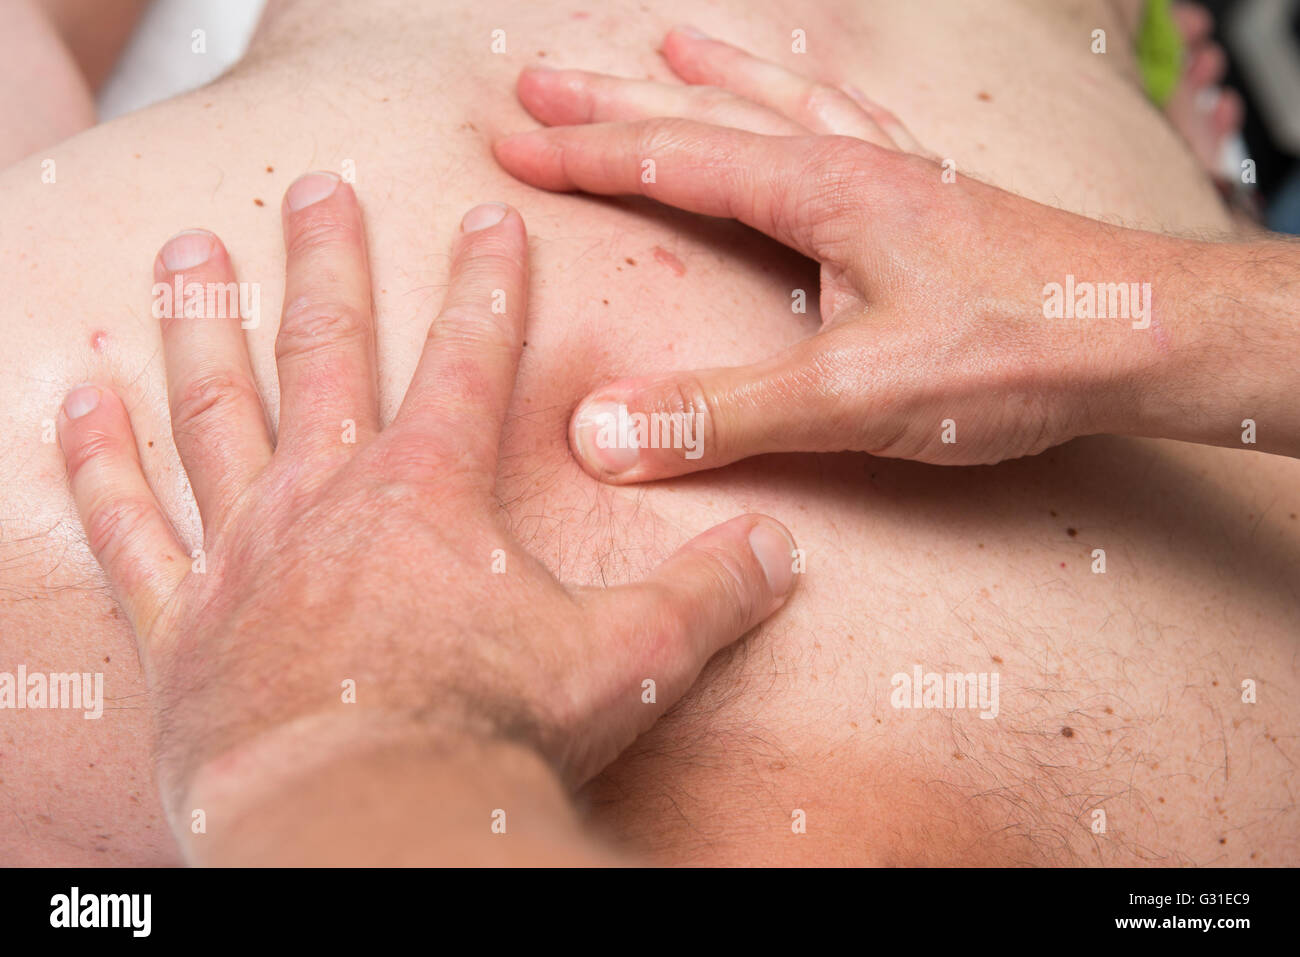 Massage therapist is working with a client Stock Photo